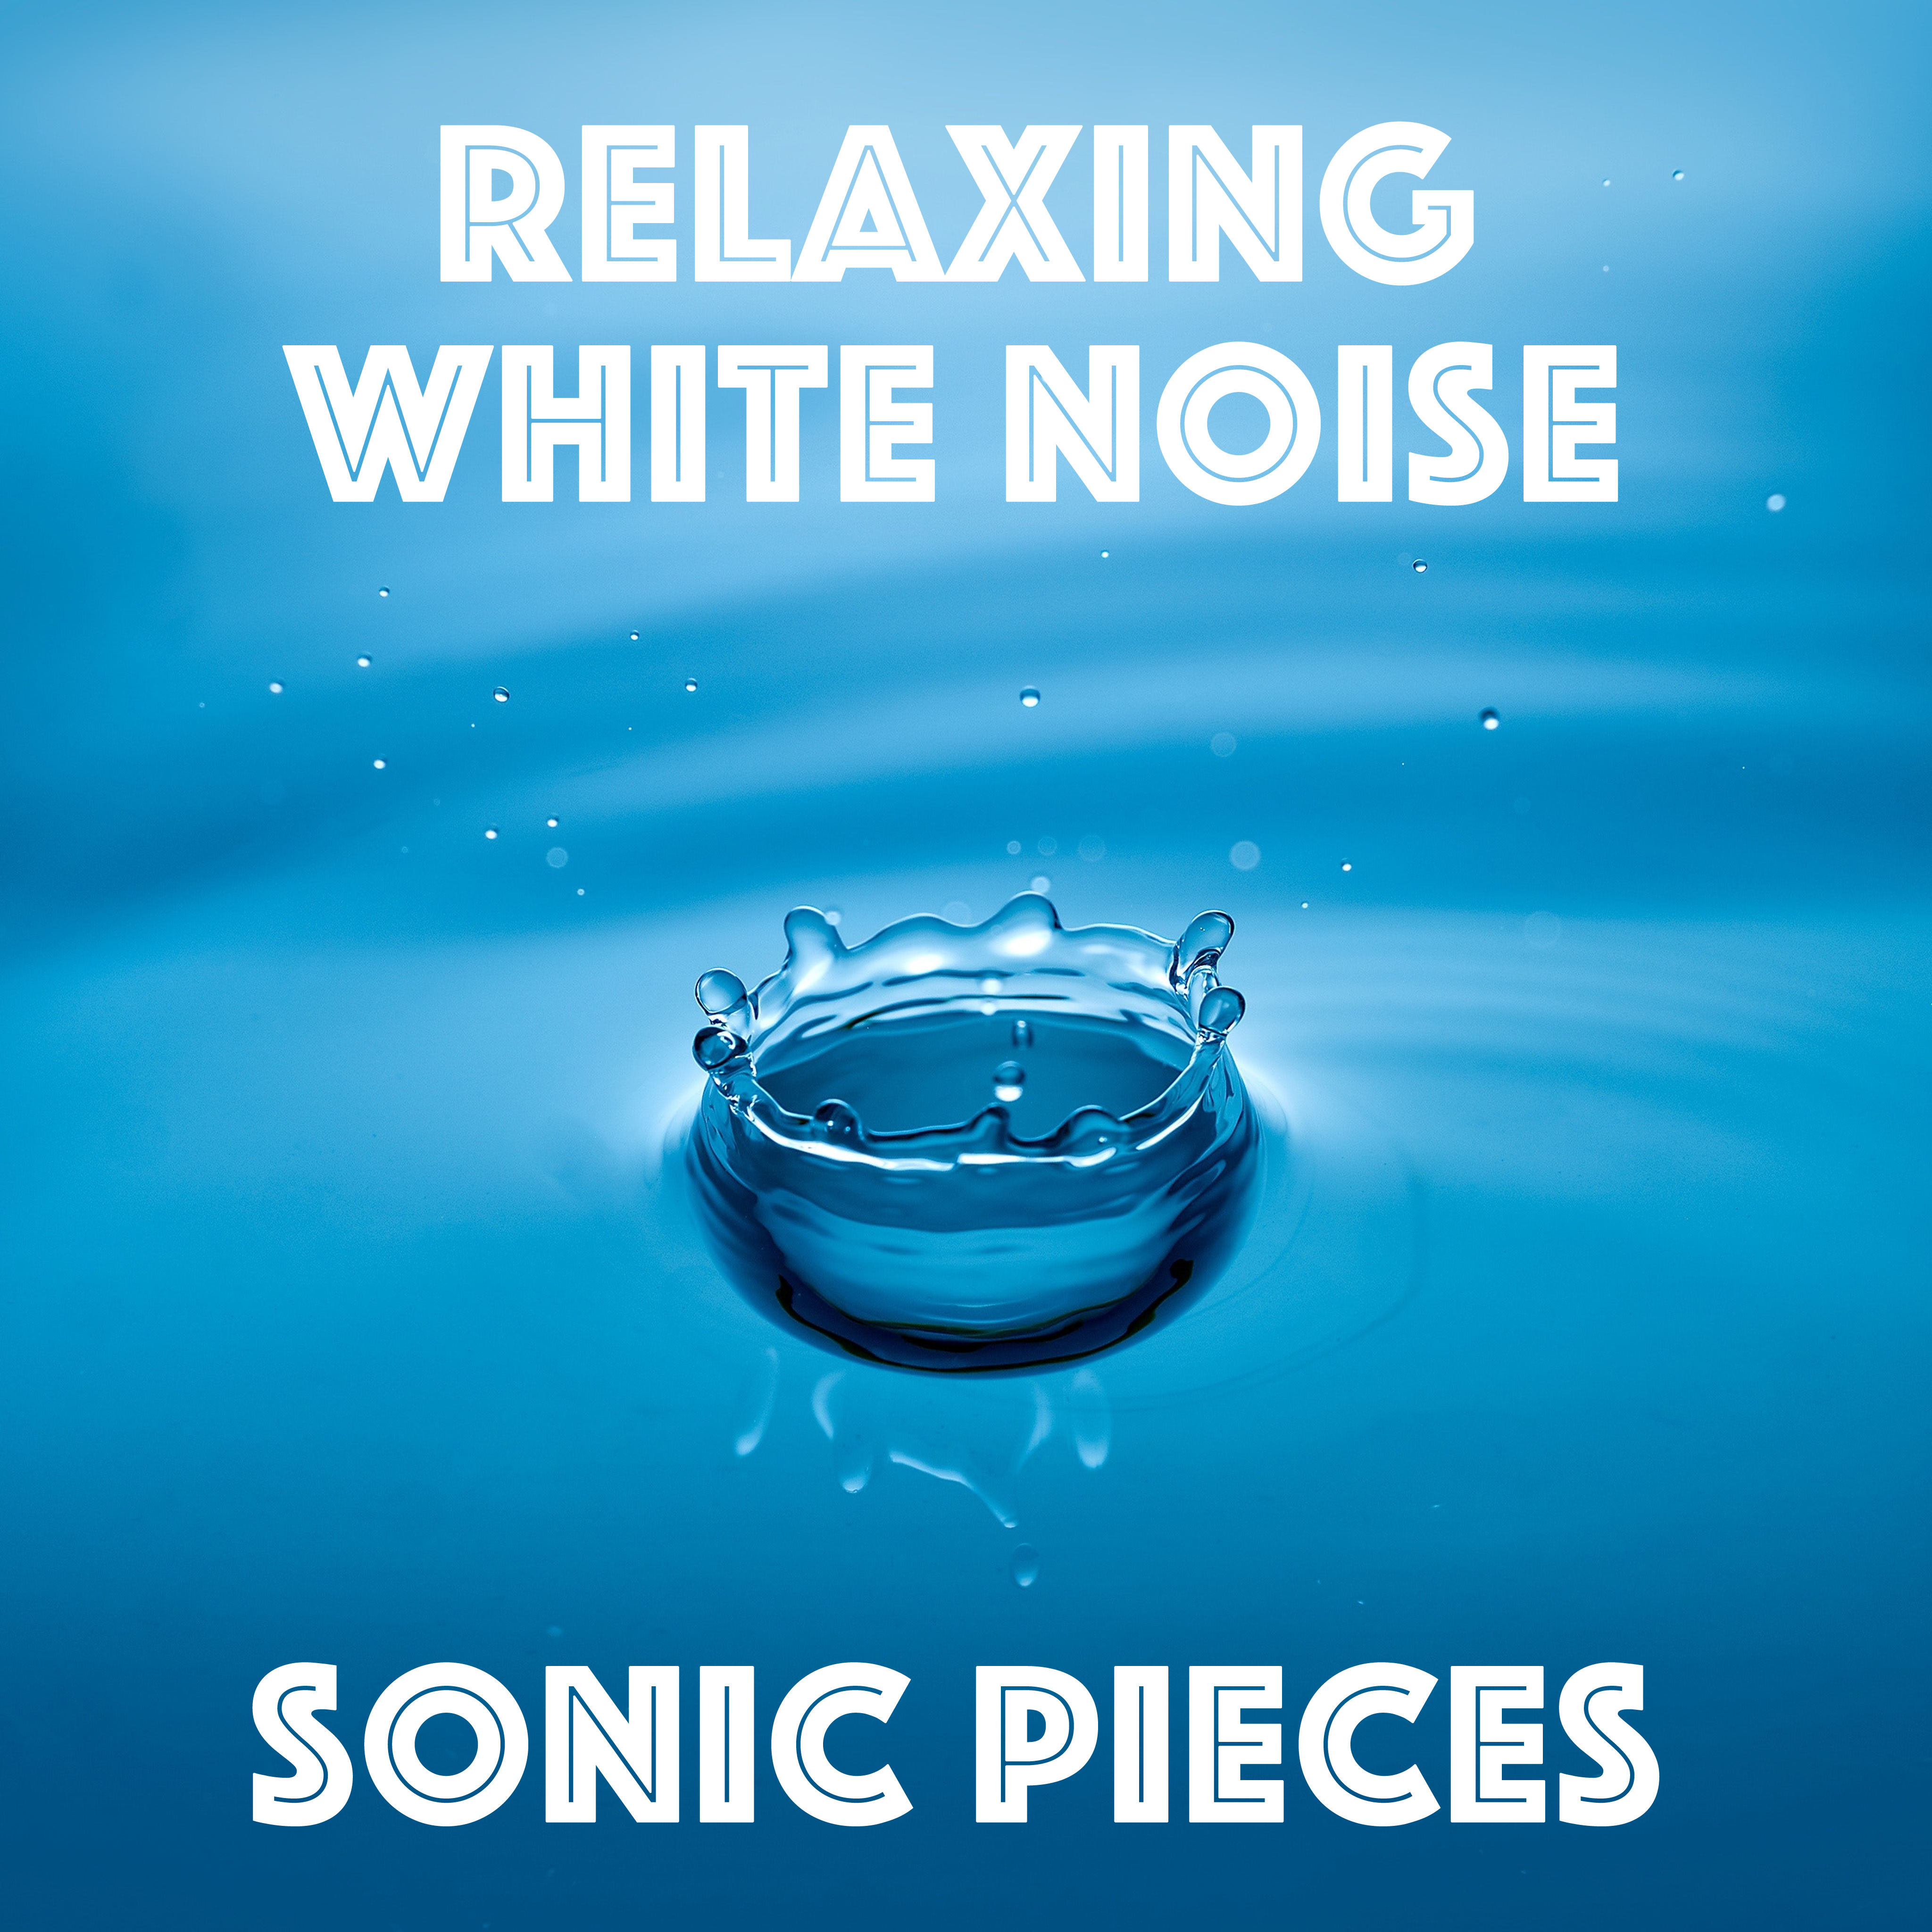 10 Relaxing White Noise Sonic Pieces